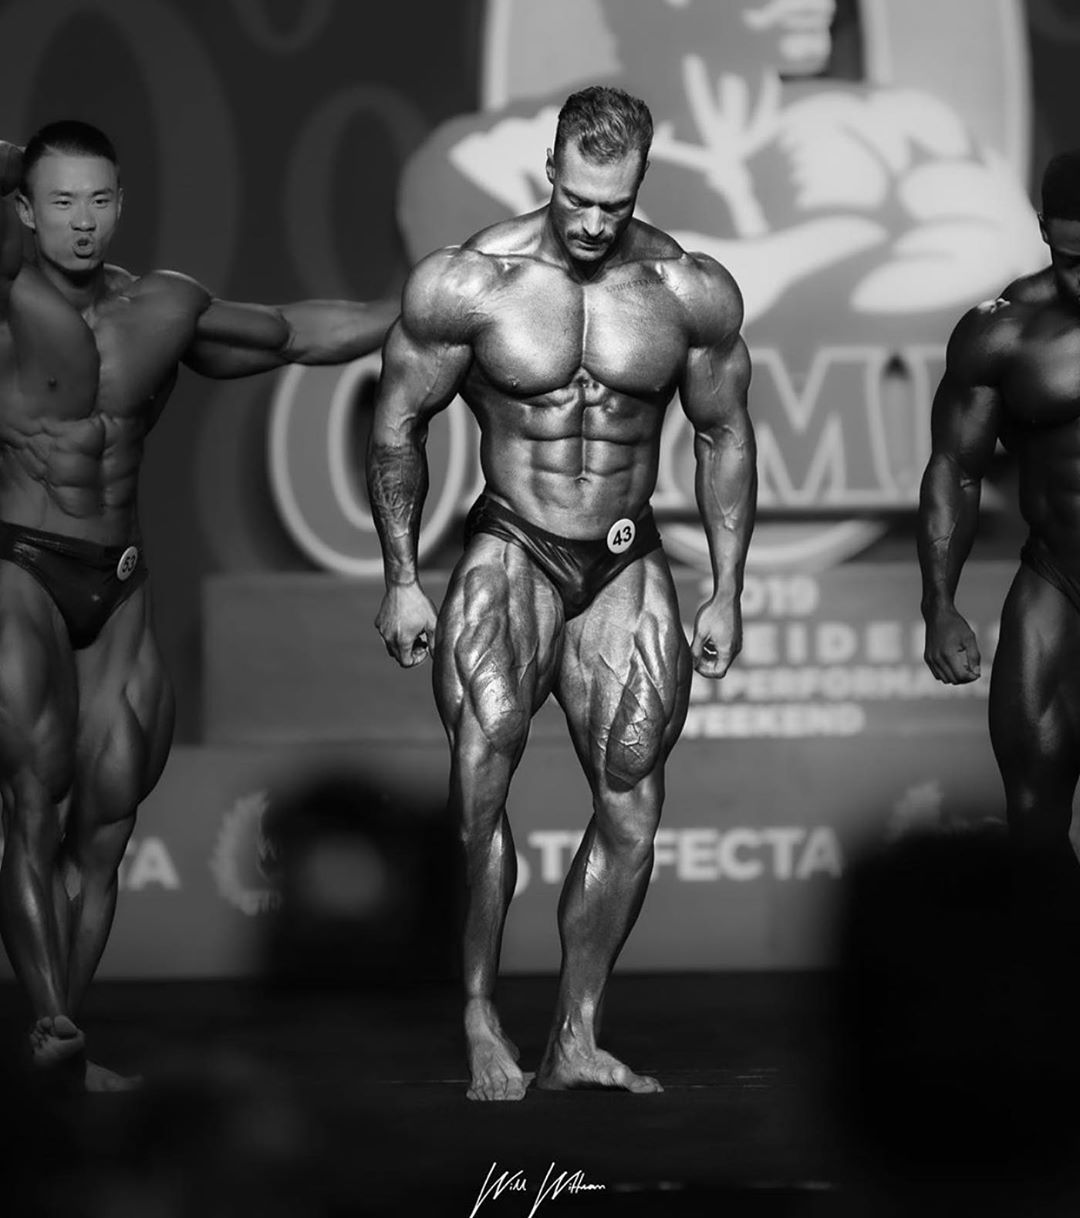 Chris Bumstead: The ComebackRevive MD Athlete Profile. blog.priceplow.com. 